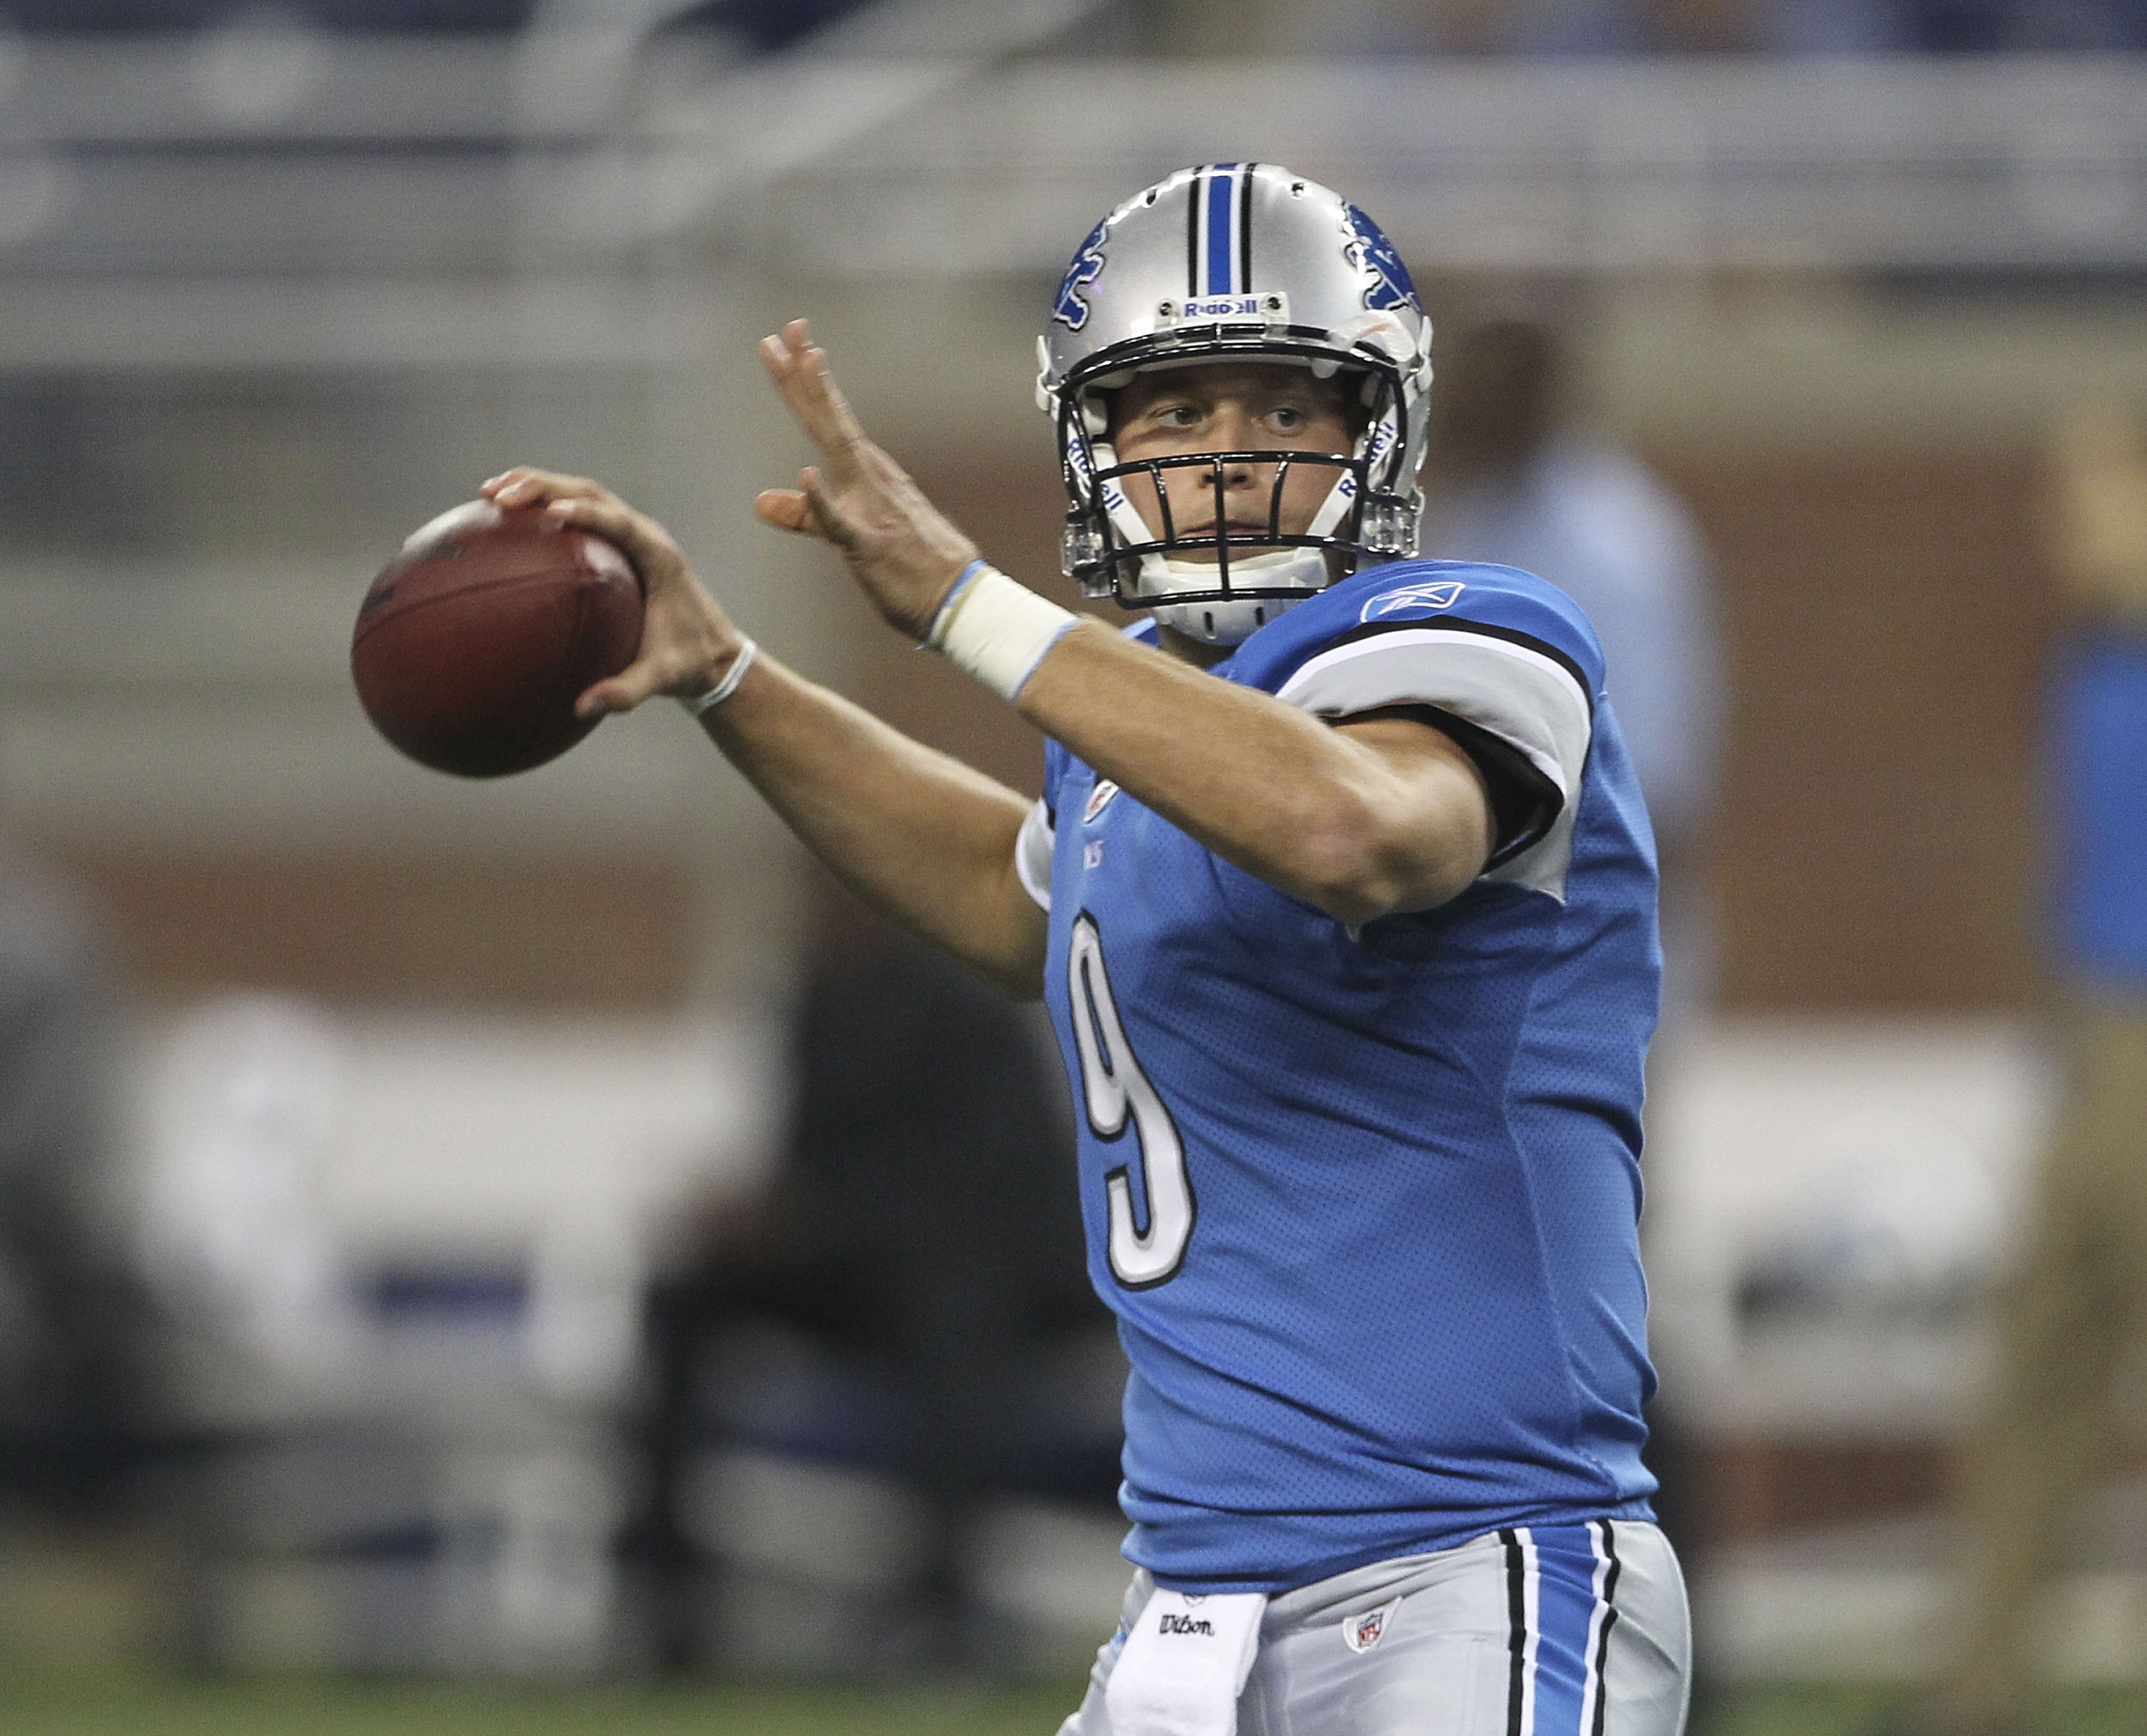 DETROIT - SEPTEMBER 02:  Matthew Stafford #9 of the Detroit Lions warms up prior to the start of the preseason game against the Buffalo Bills at Ford Field on September 2, 2010 in Detroit, Michigan.  (Photo by Leon Halip/Getty Images)